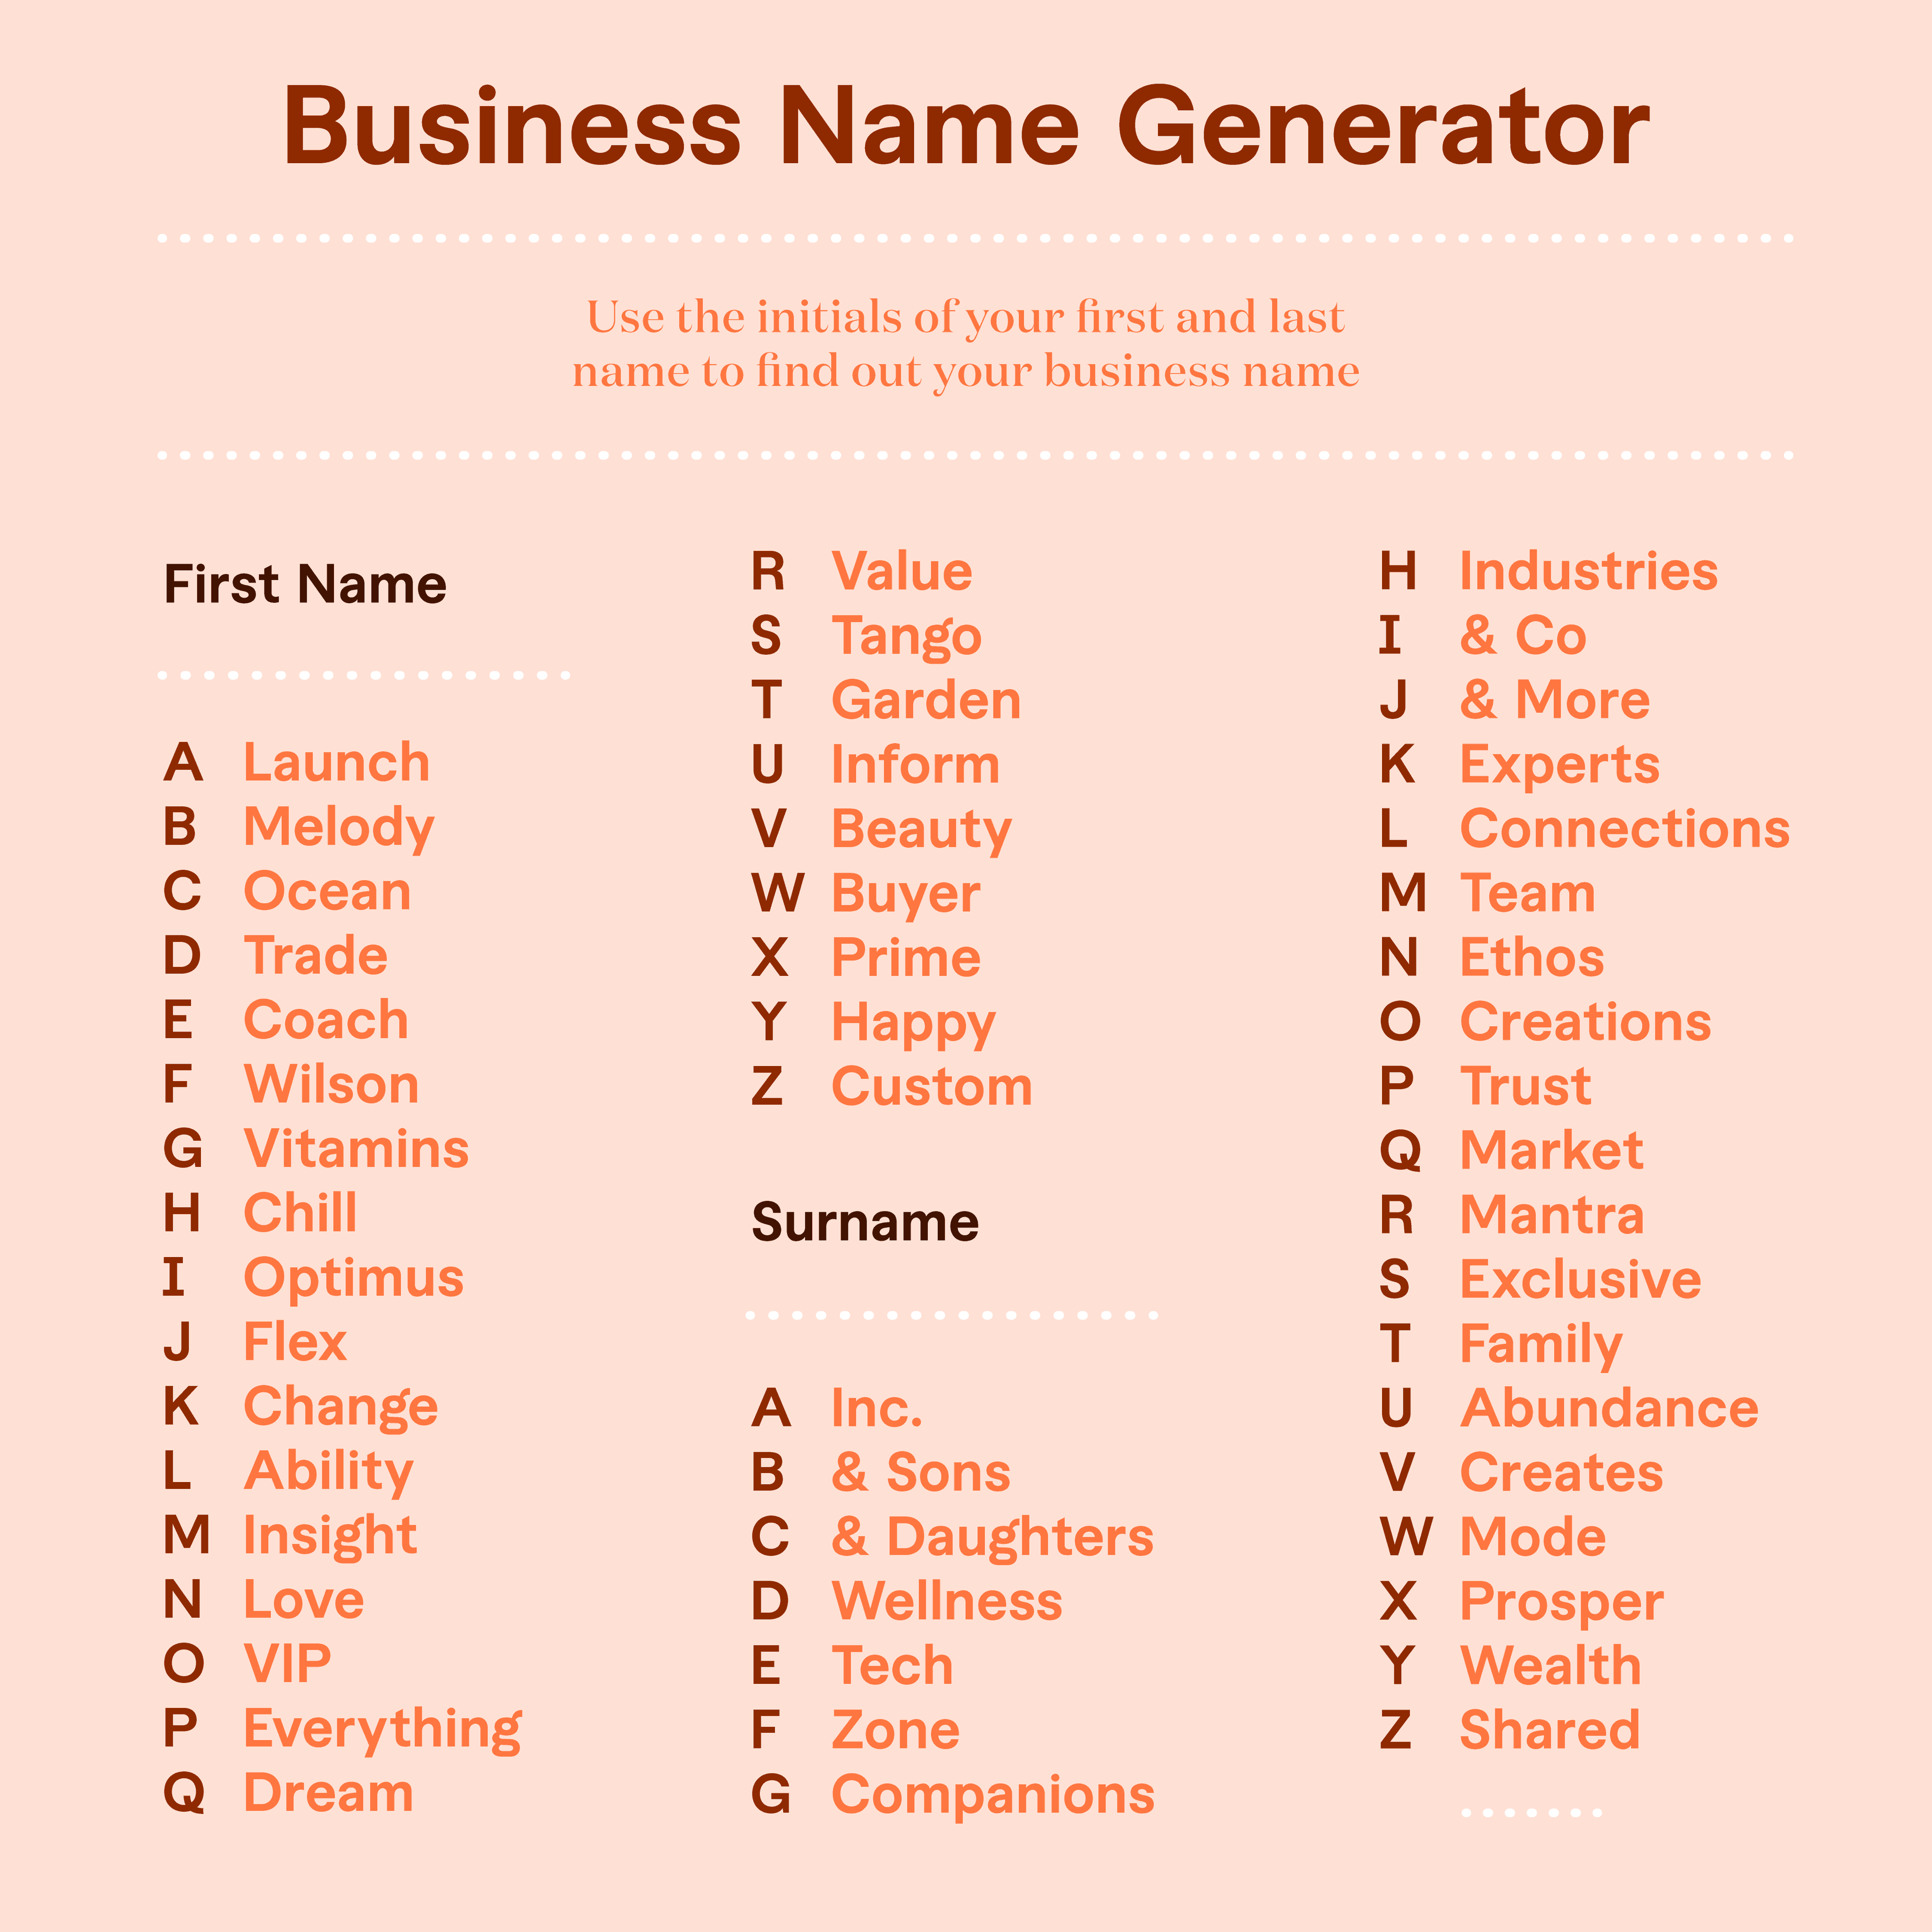 First name last name middle name. First and last name. First name и last name. First name Middle name last name. Business name.